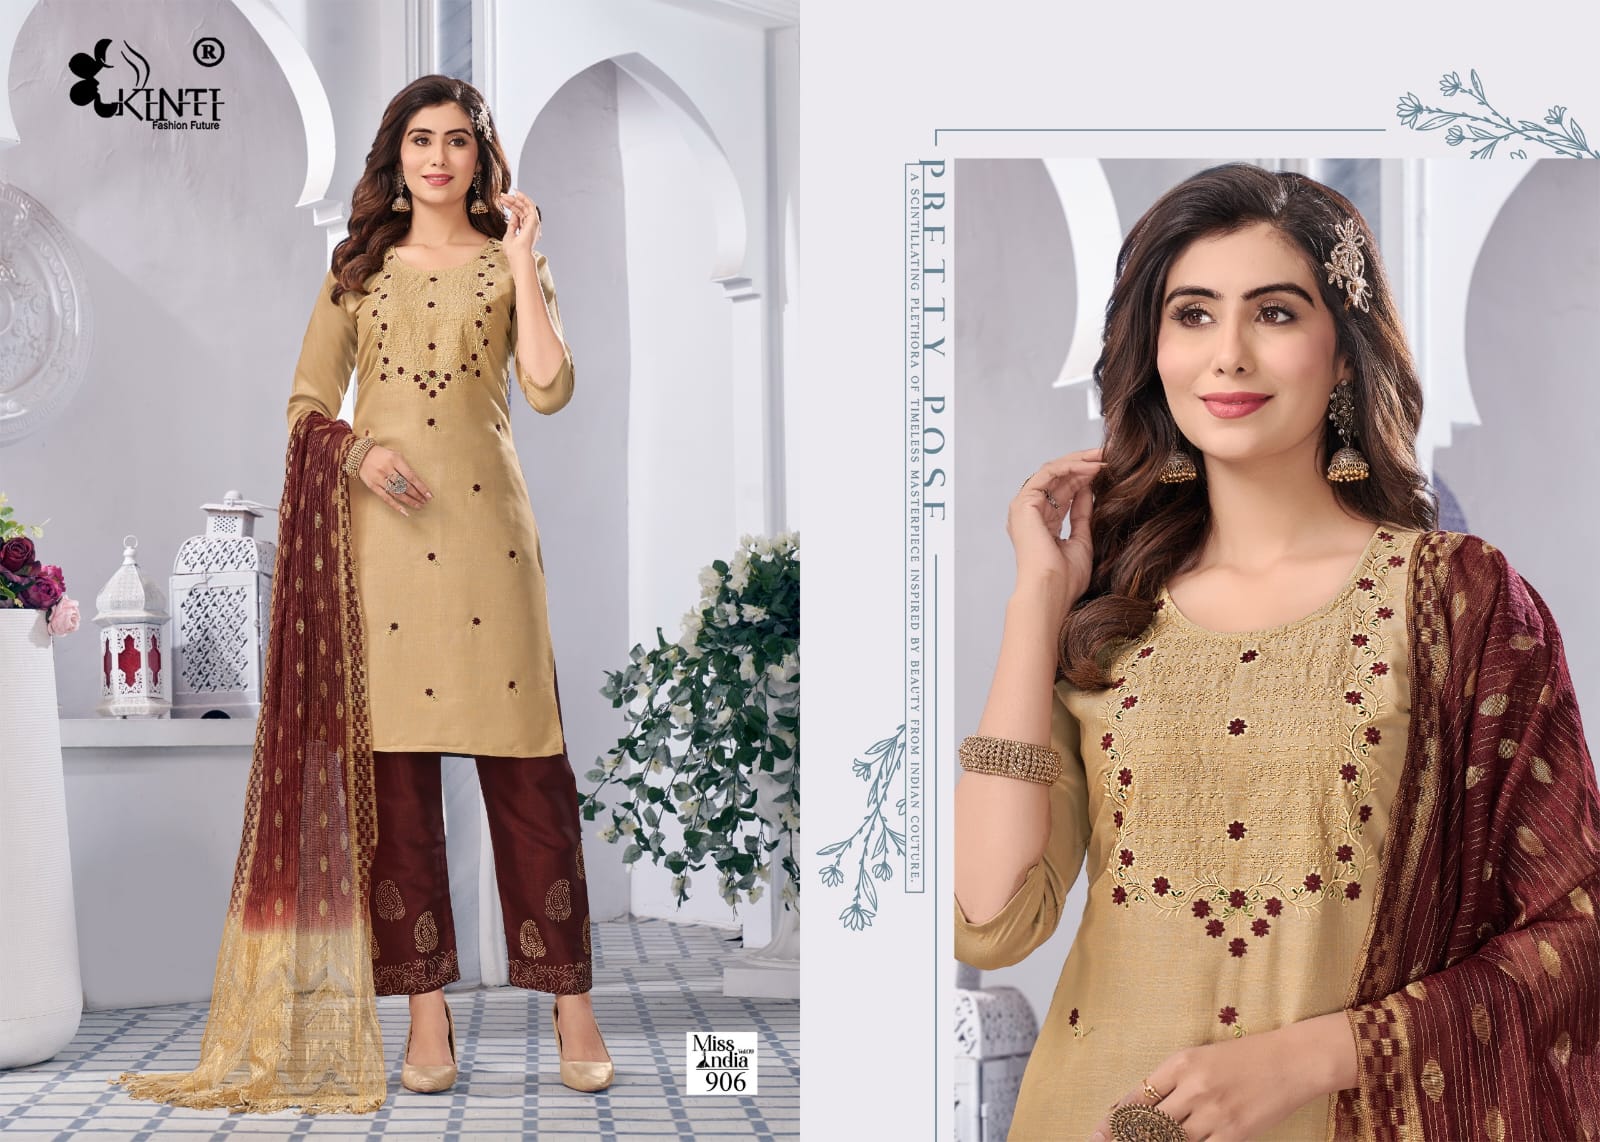 Miss India Vol 9 Kinti Two Tone Rayon Readymade Pant Style Suits